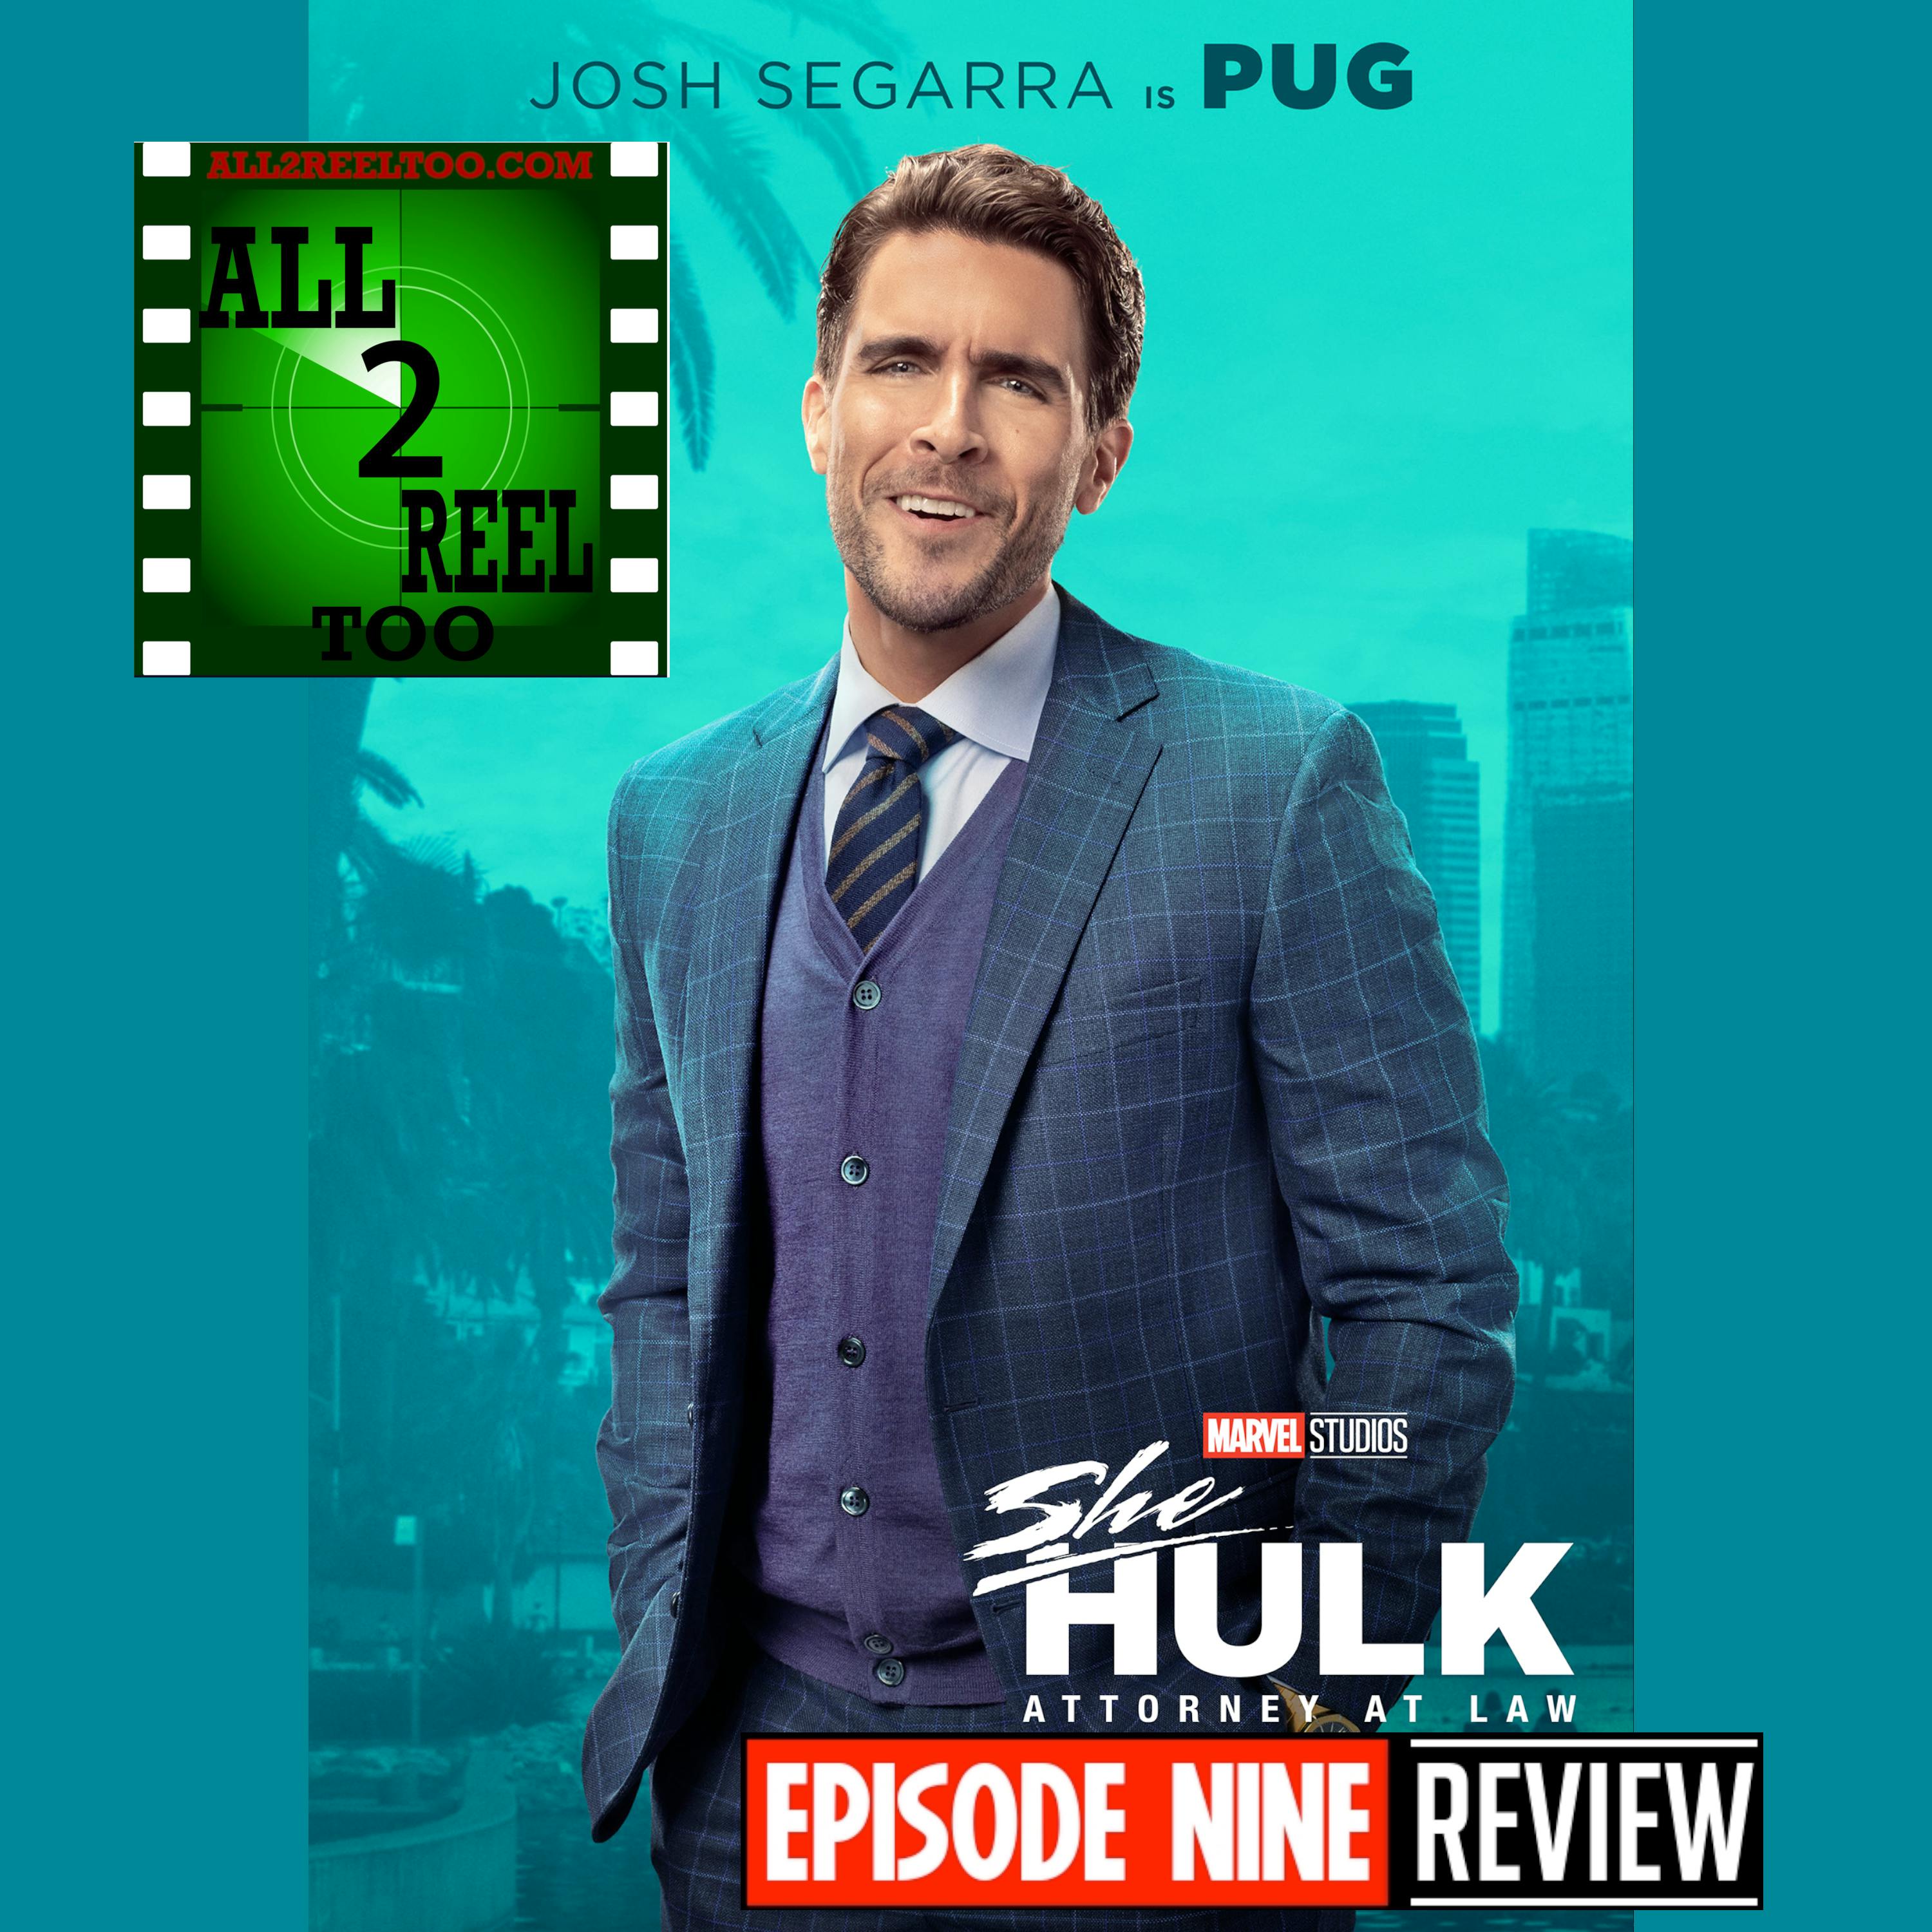 She-Hulk: Attorney at Law - EPISODE 9 REVIEW